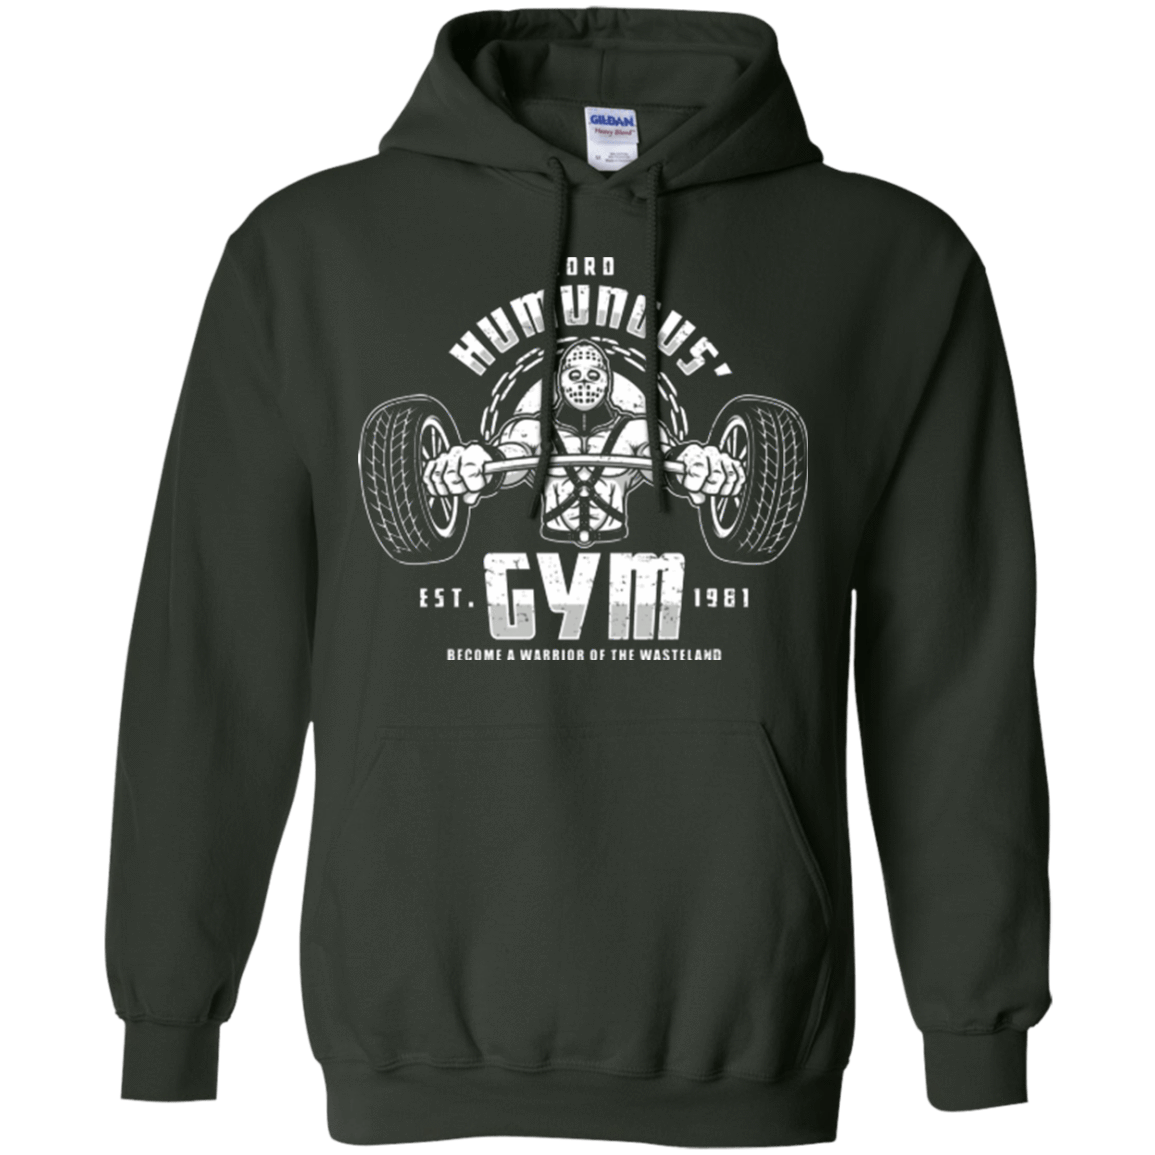 Sweatshirts Forest Green / Small Lord Humungus' Gym Pullover Hoodie